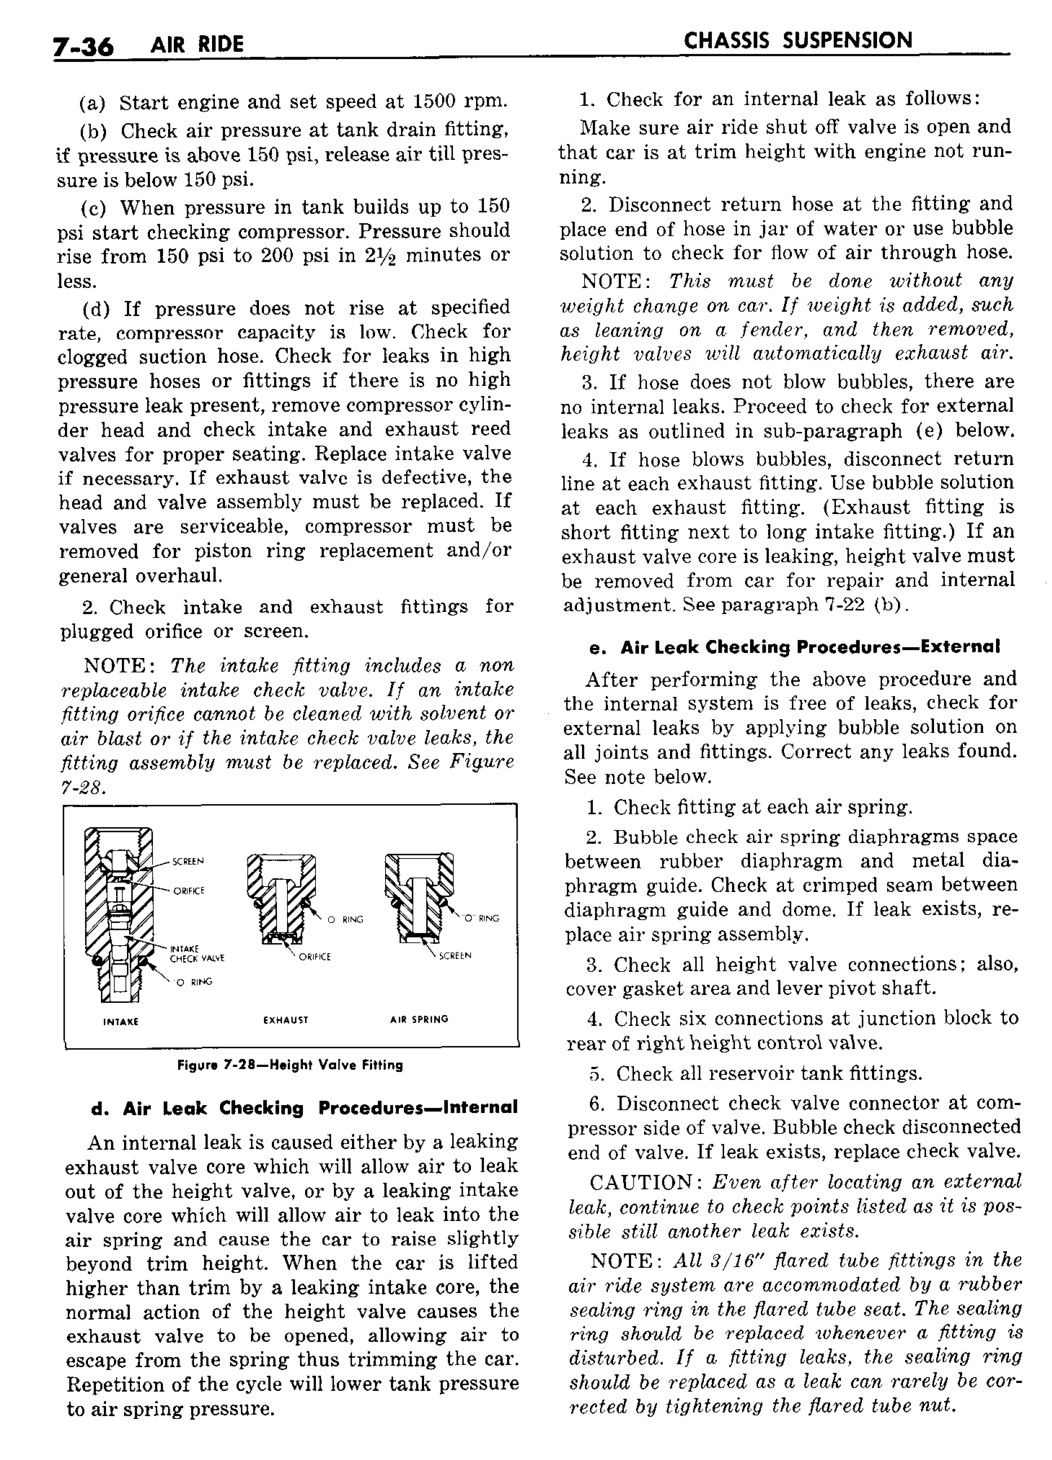 n_08 1959 Buick Shop Manual - Chassis Suspension-036-036.jpg